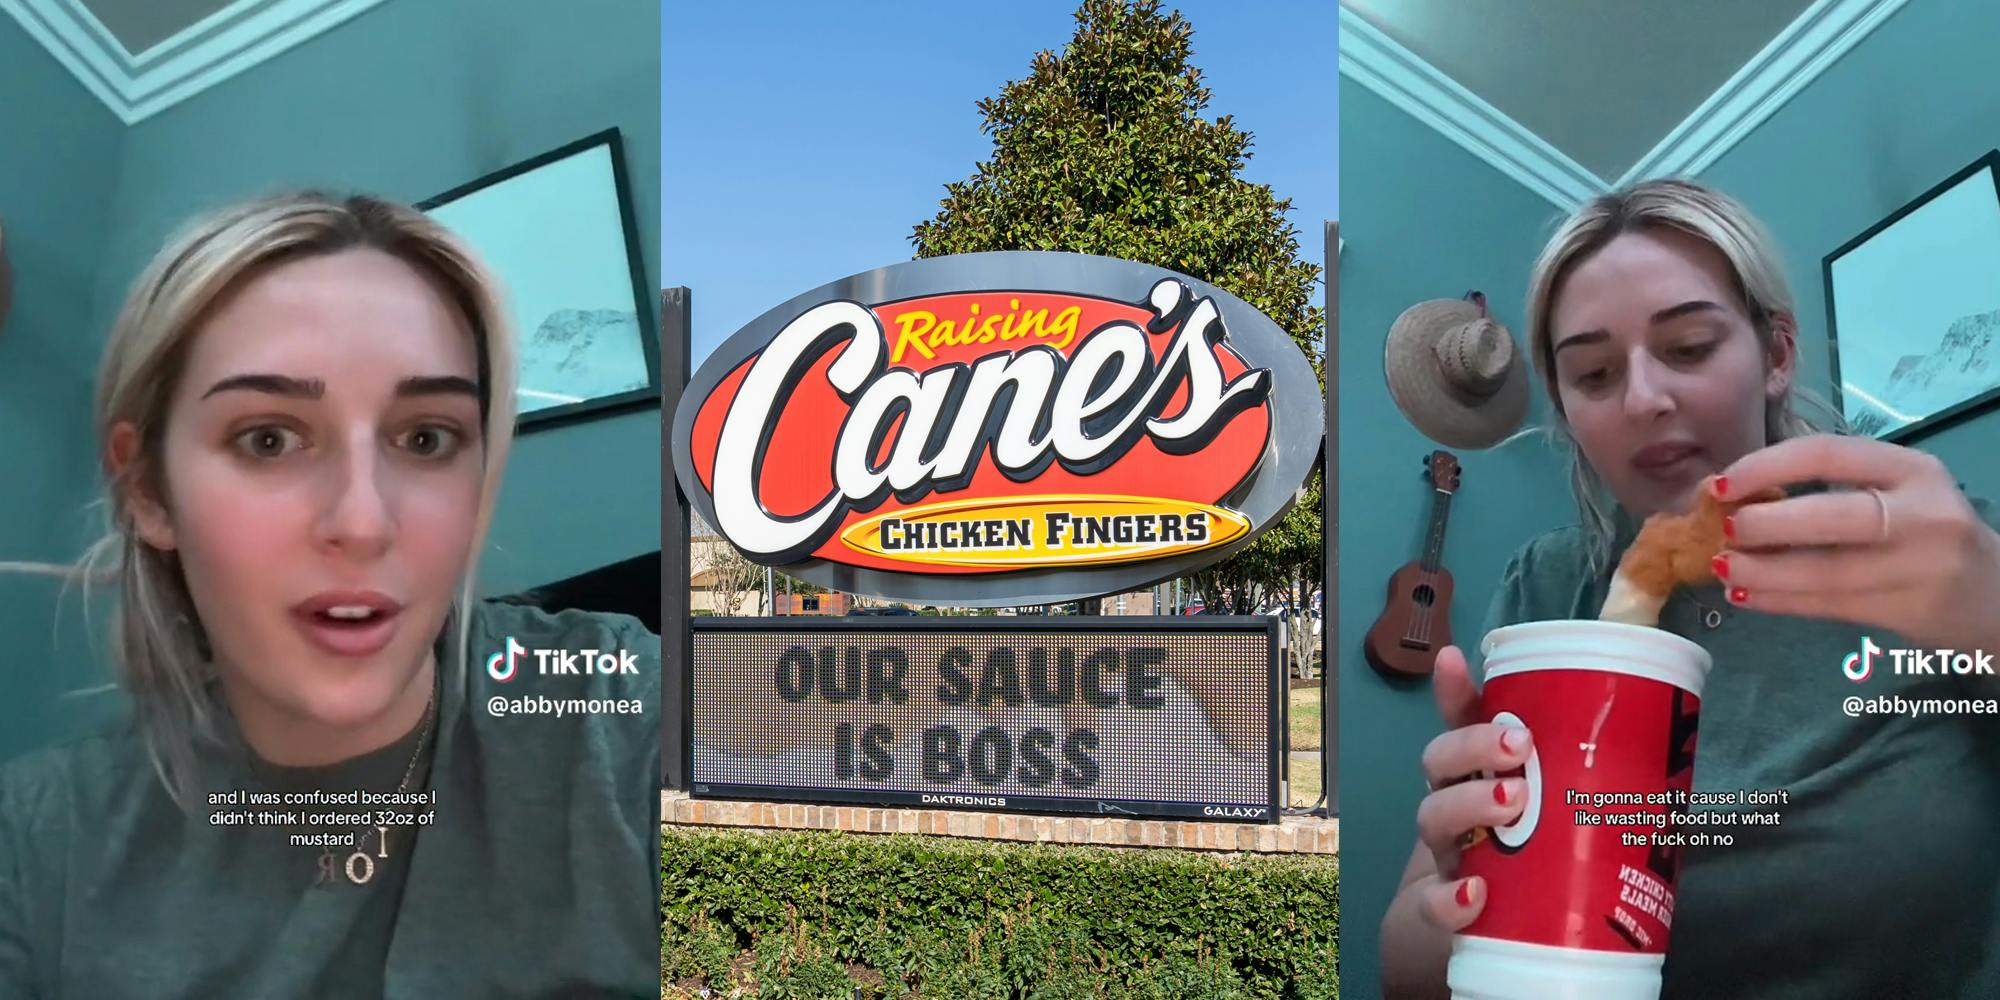 young woman receives 32 oz of mustard from Raising Cane's